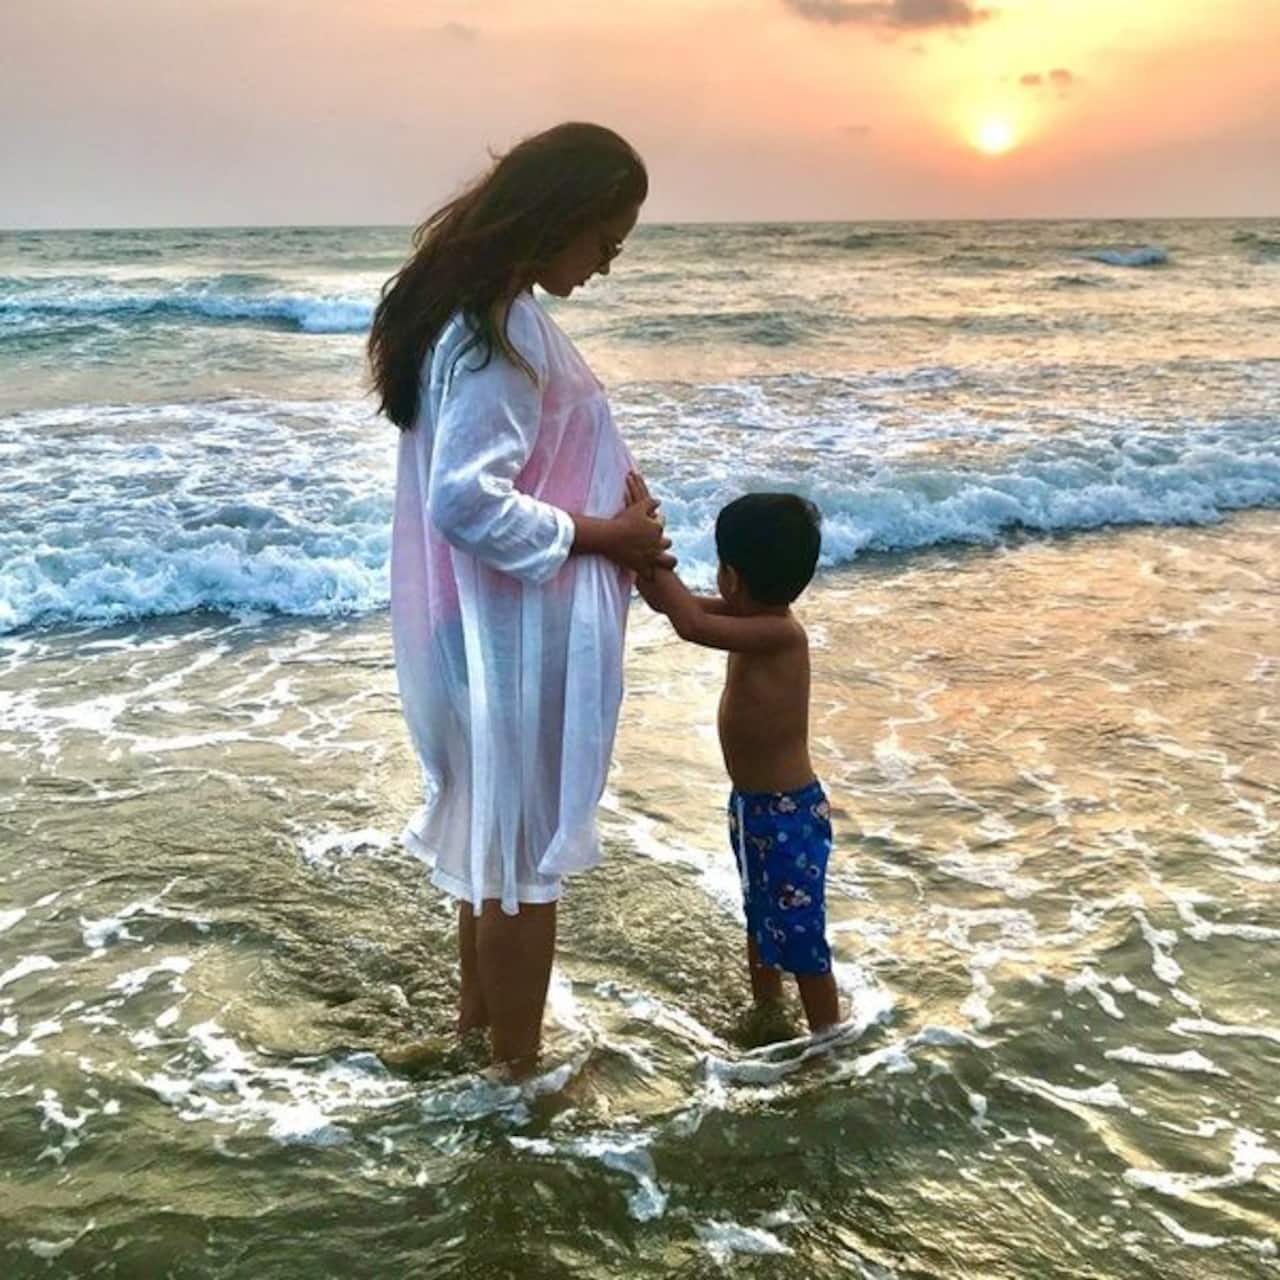 Sameera Reddy OPENS UP about suffering from postpartum depression after first baby: 'It took a toll on my marriage'